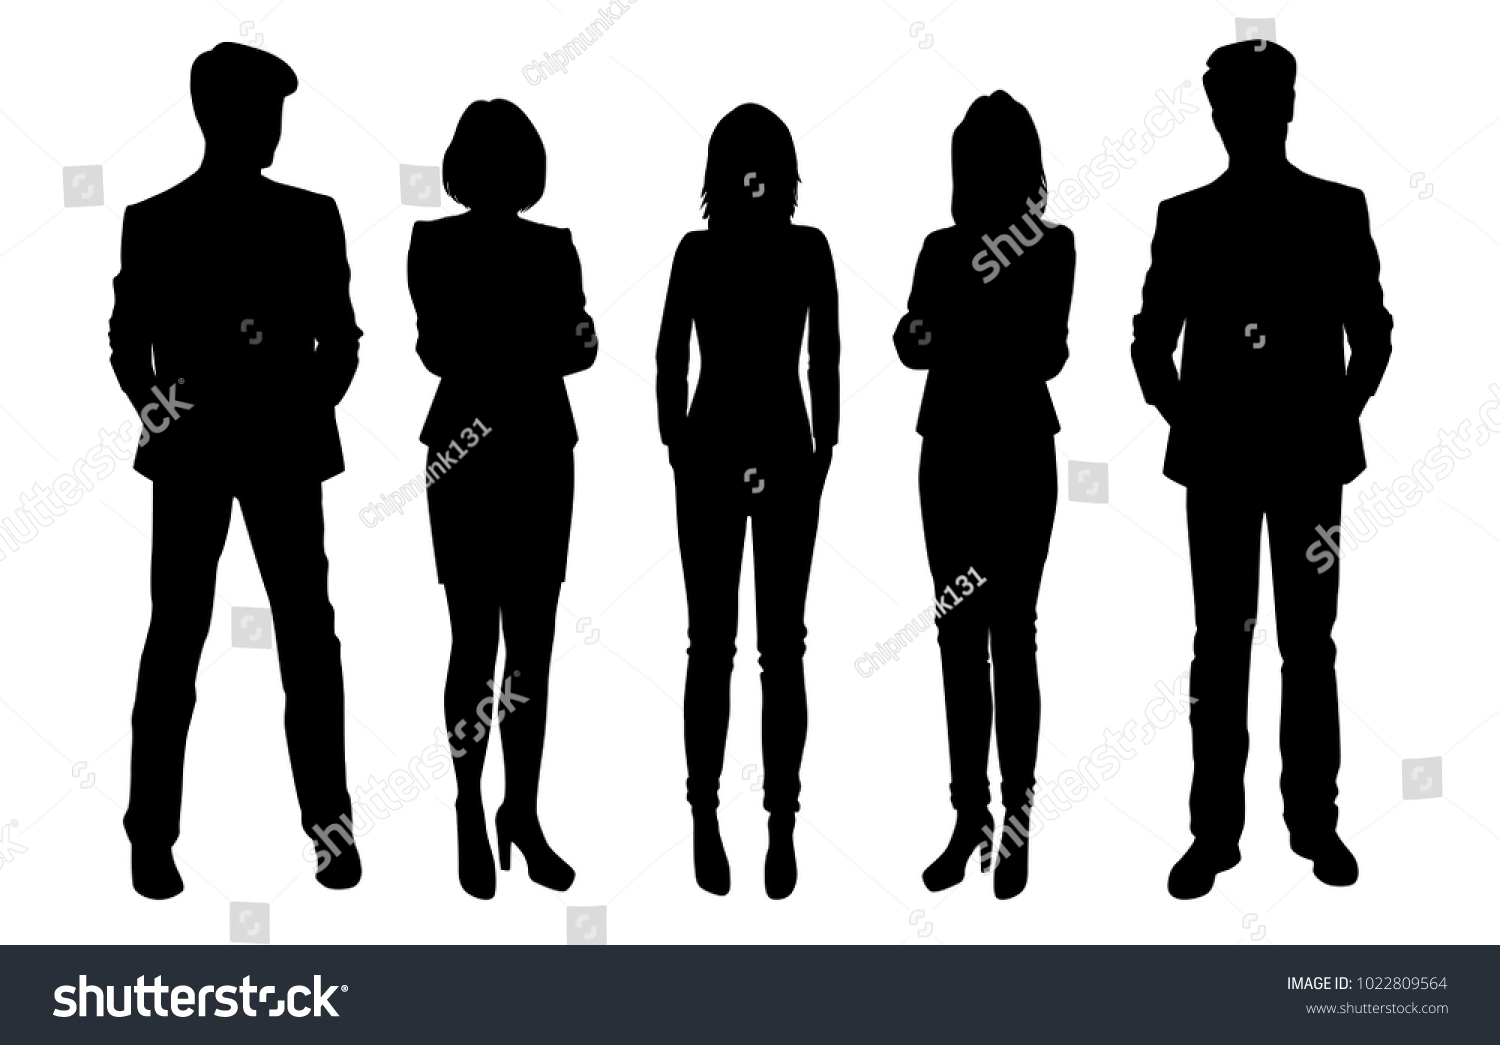 Set of business people, vector silhouettes, group men and women, black color, isolated on white background #1022809564